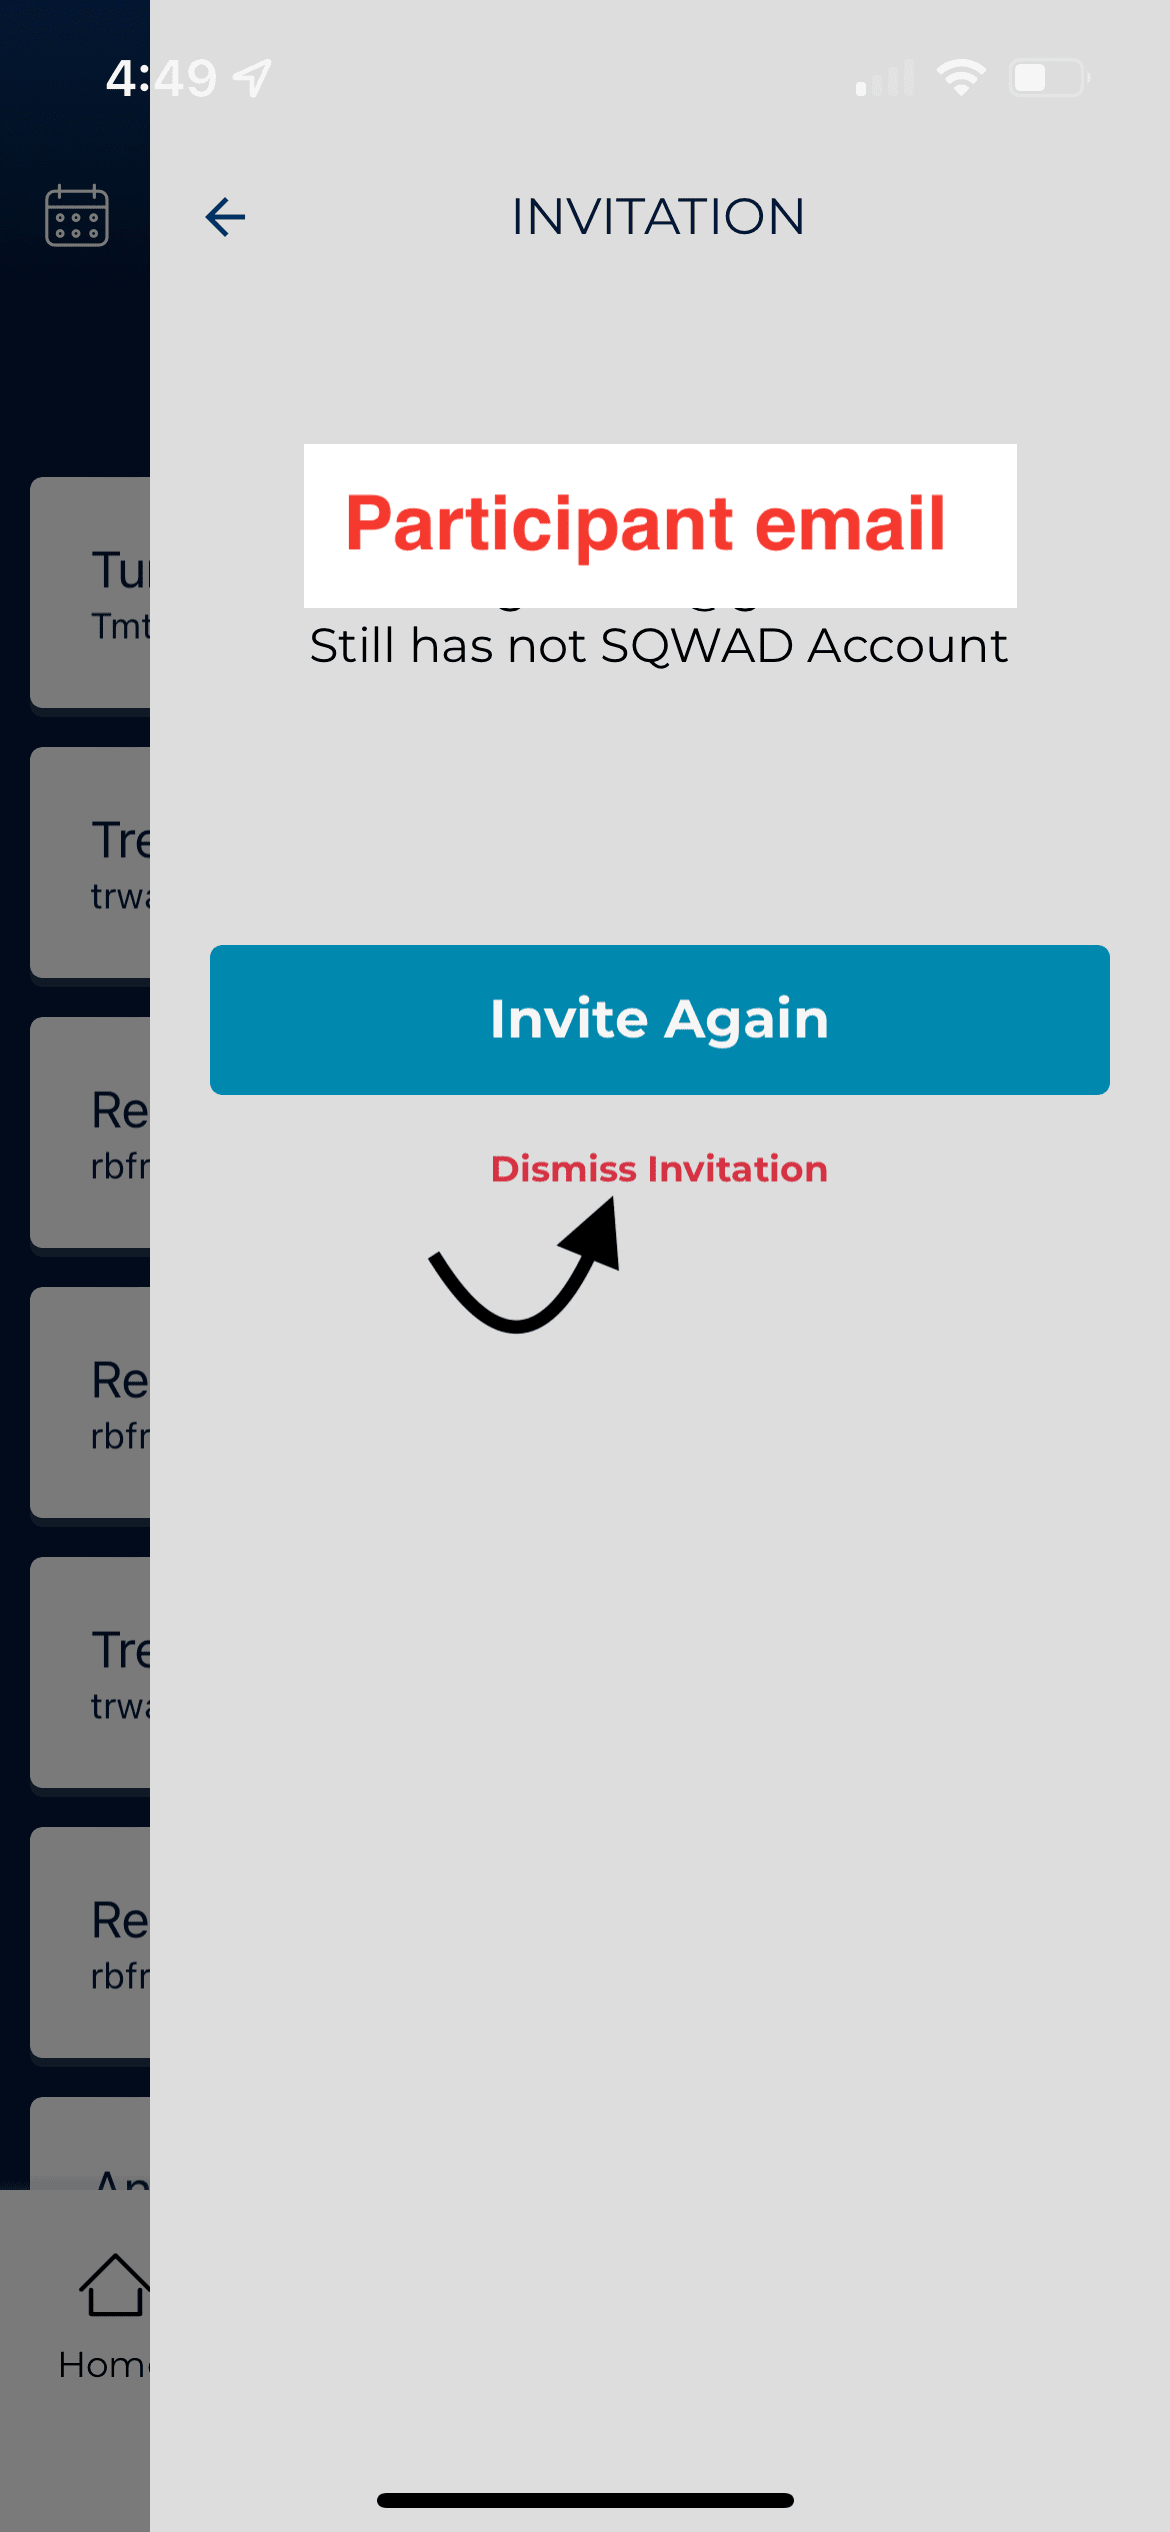 Shows invitation screen: "invitation" at the top, "paticipant email still has no SQWAD account" and buttons labeled "Invite again" and "dismiss invitation".